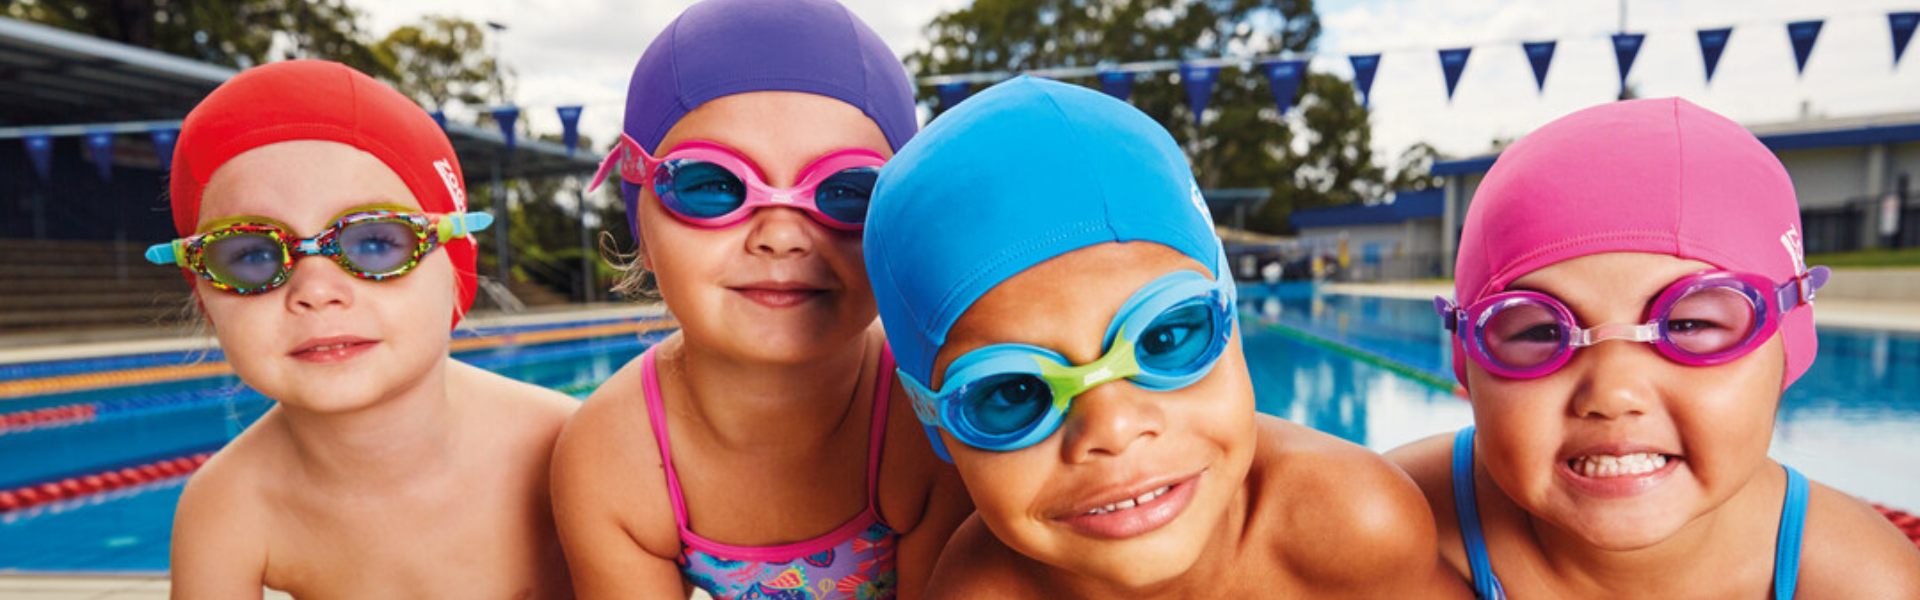 4 kids next to the pool in kids goggles and swim caps 